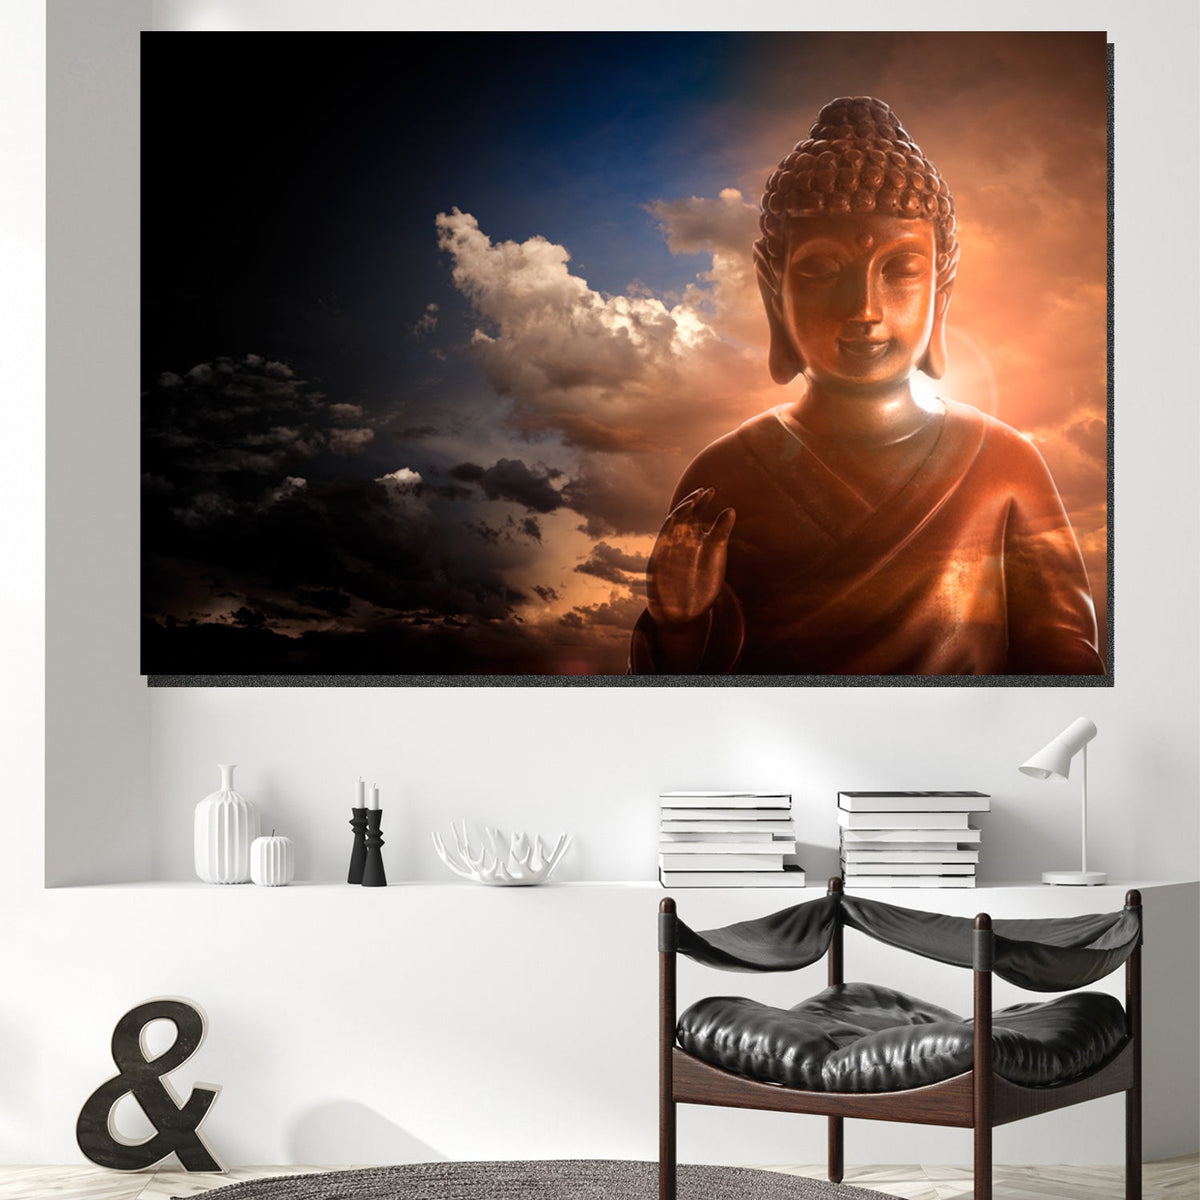 https://cdn.shopify.com/s/files/1/0387/9986/8044/products/BuddhaBlessingCanvasArtprintStretched-2.jpg